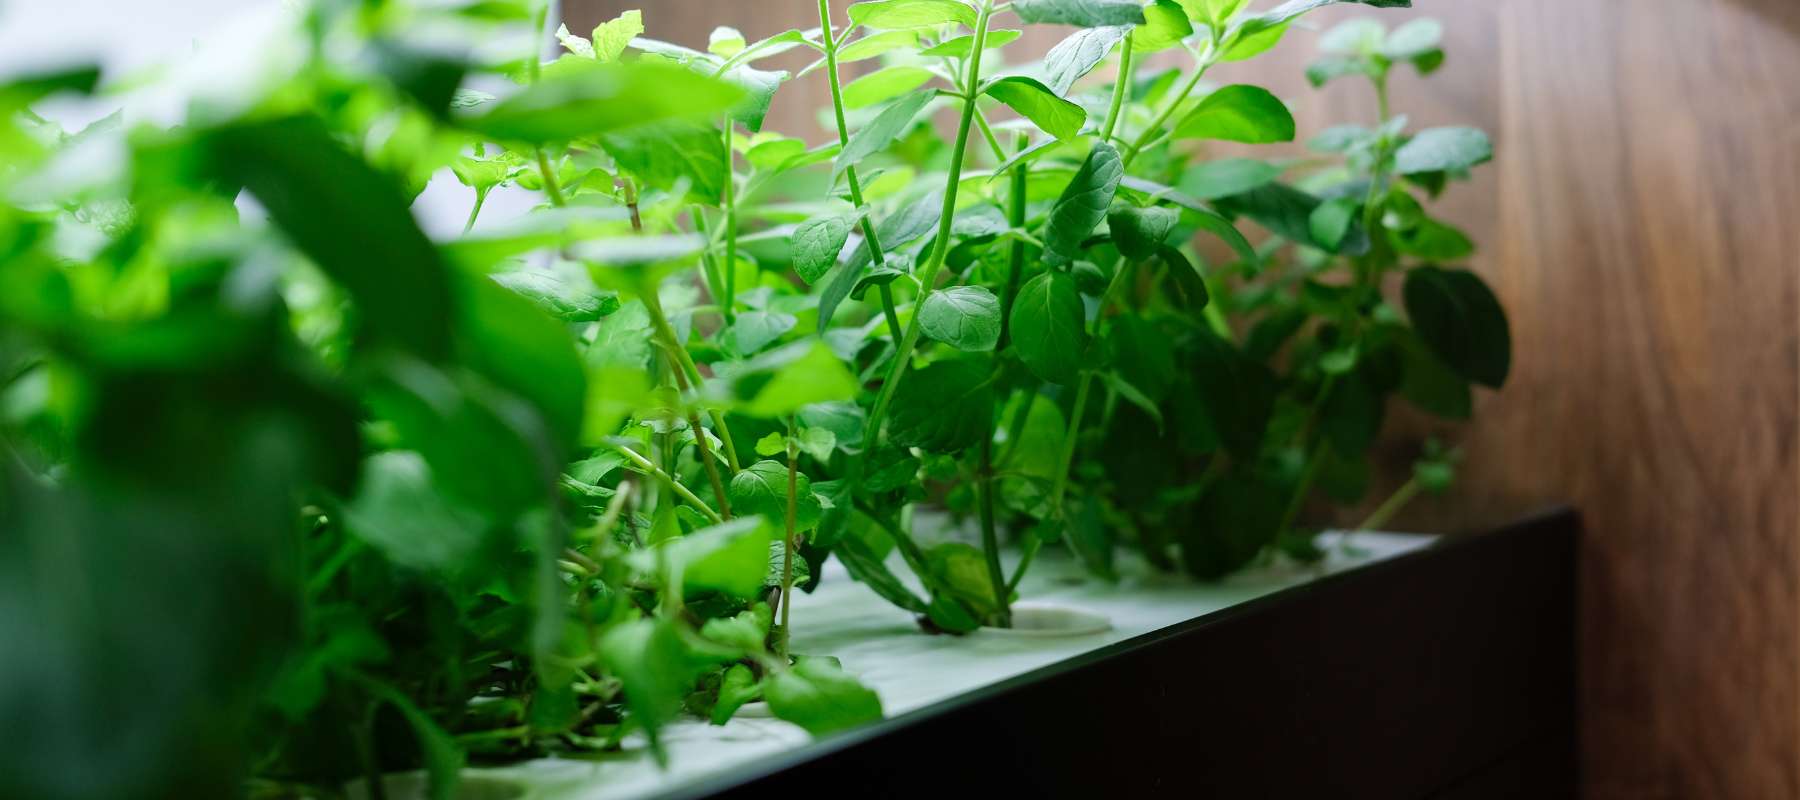 Getting Started with Hydroponic Gardening